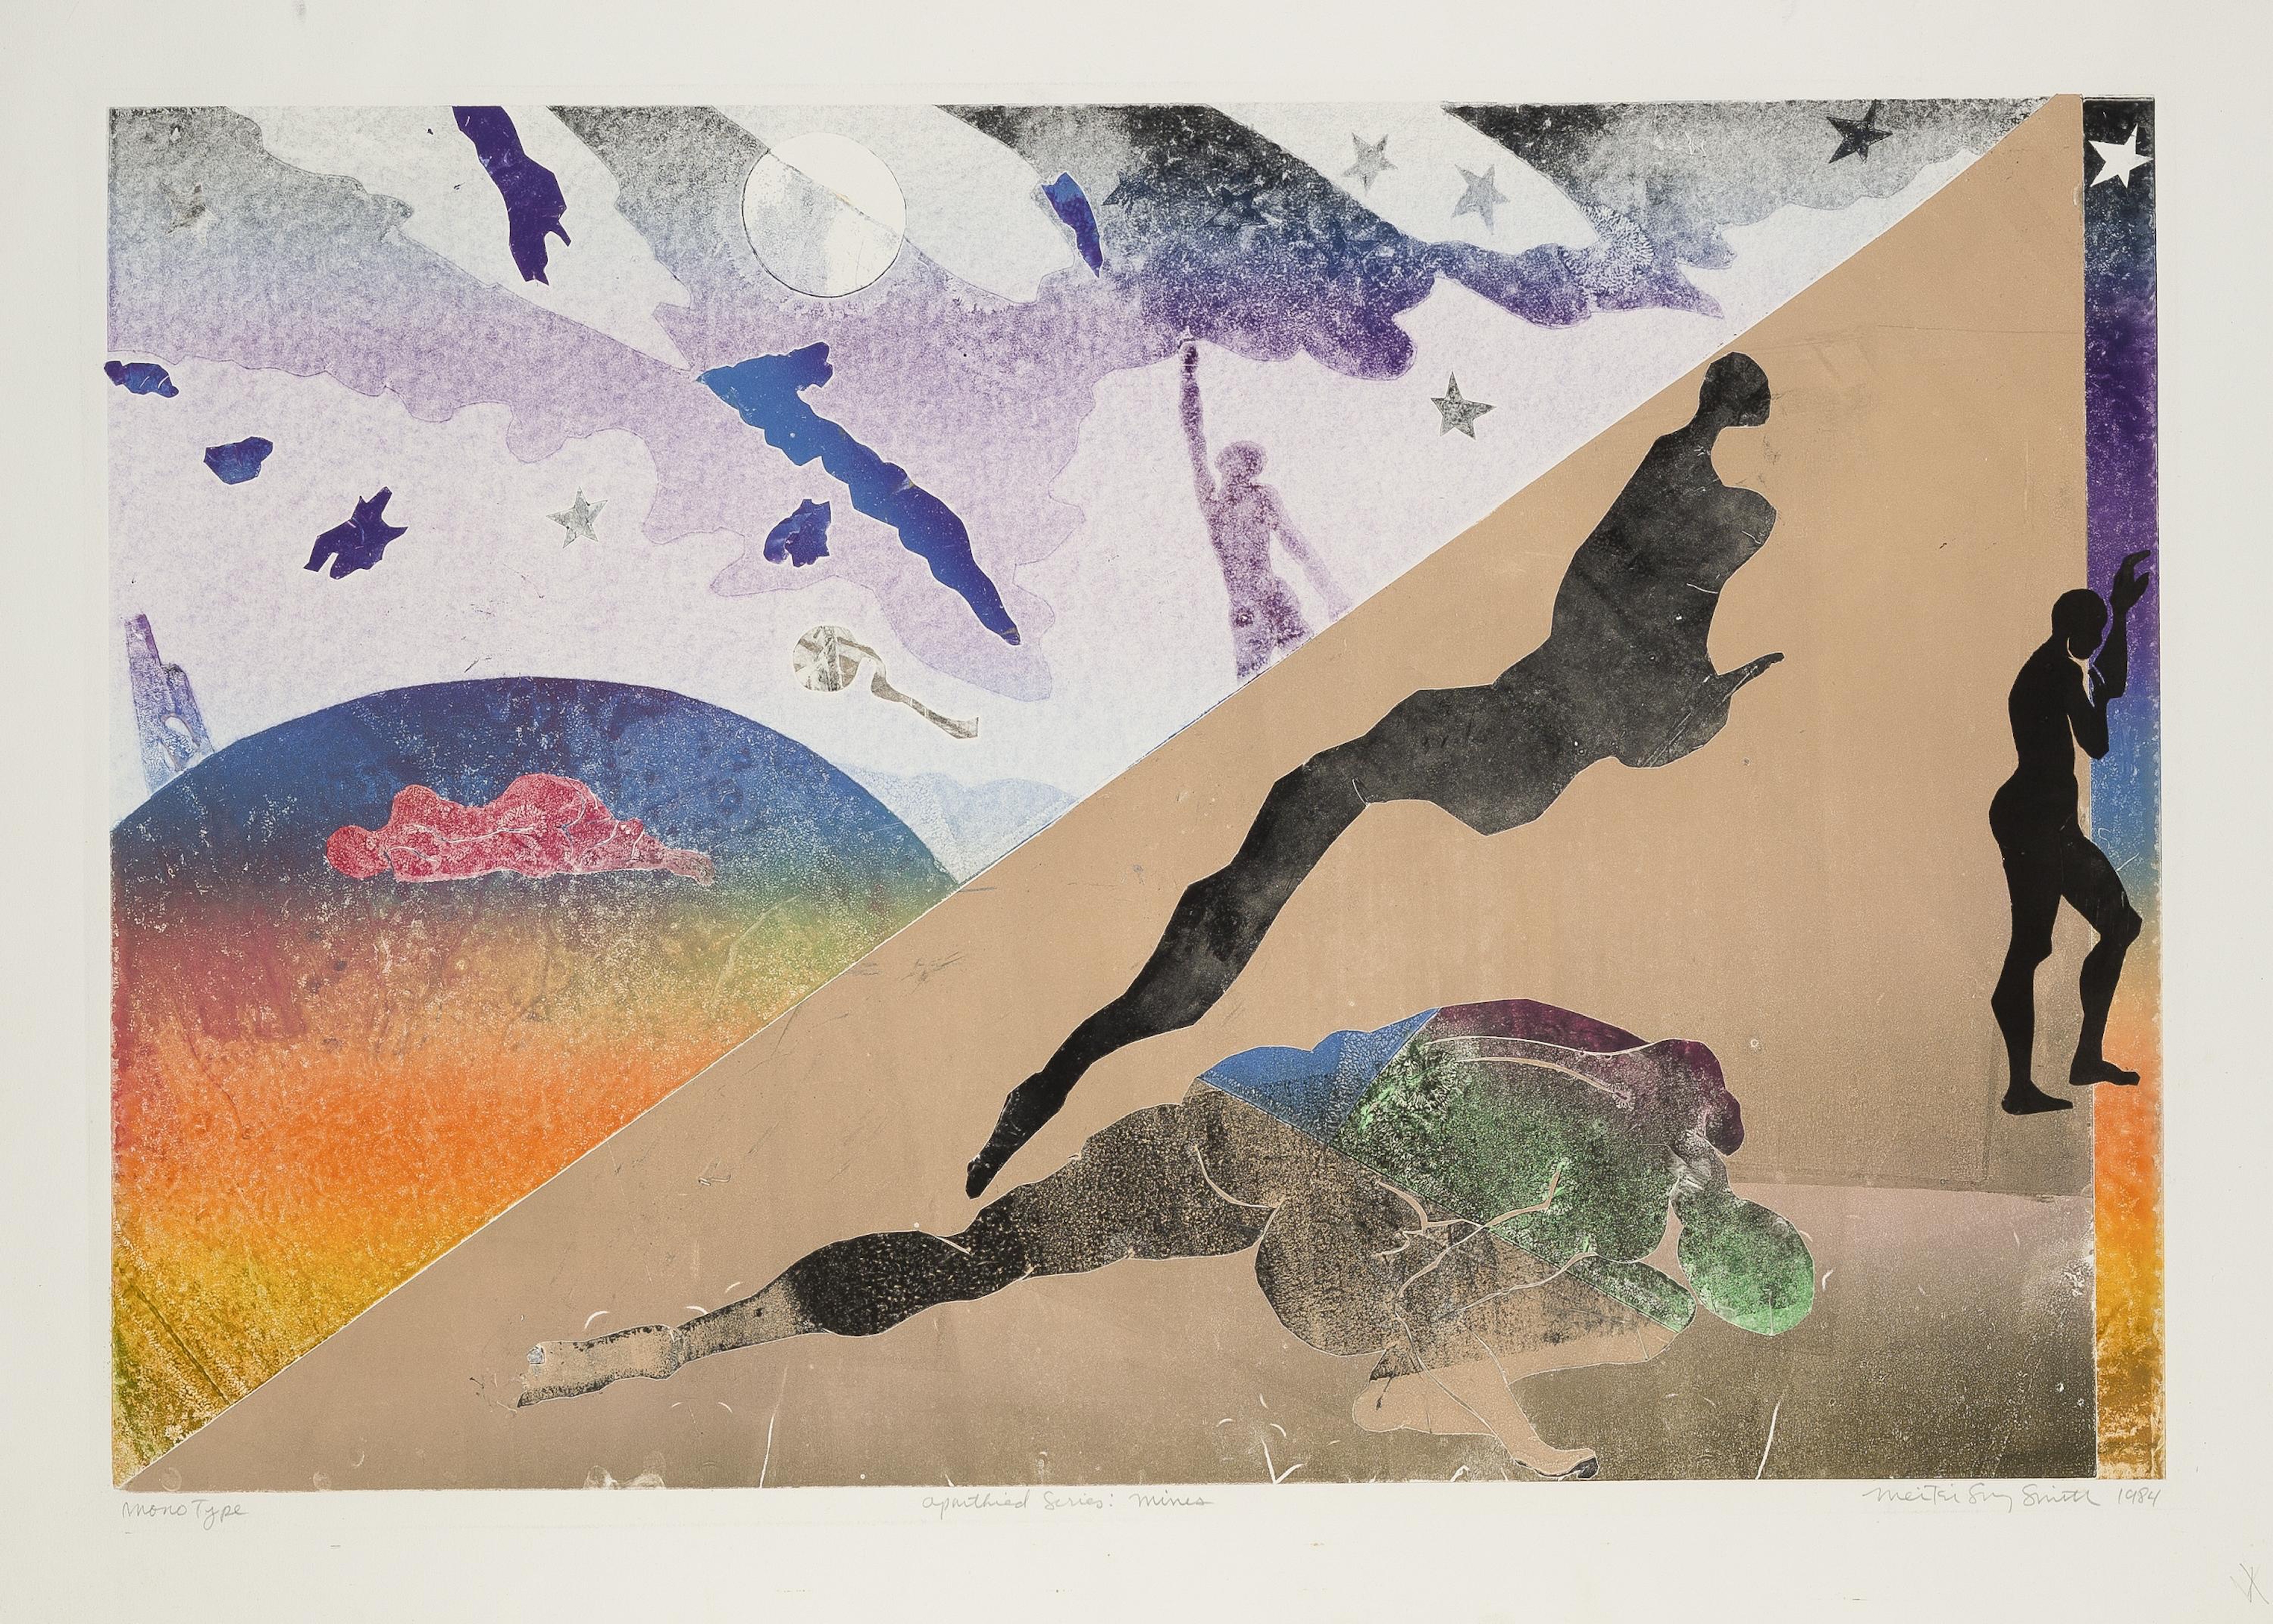 Mei Tai Smith, Mines-Apartheid Series, Monotype, 1984. Abstract composition referencing landscape with figures in lower right.